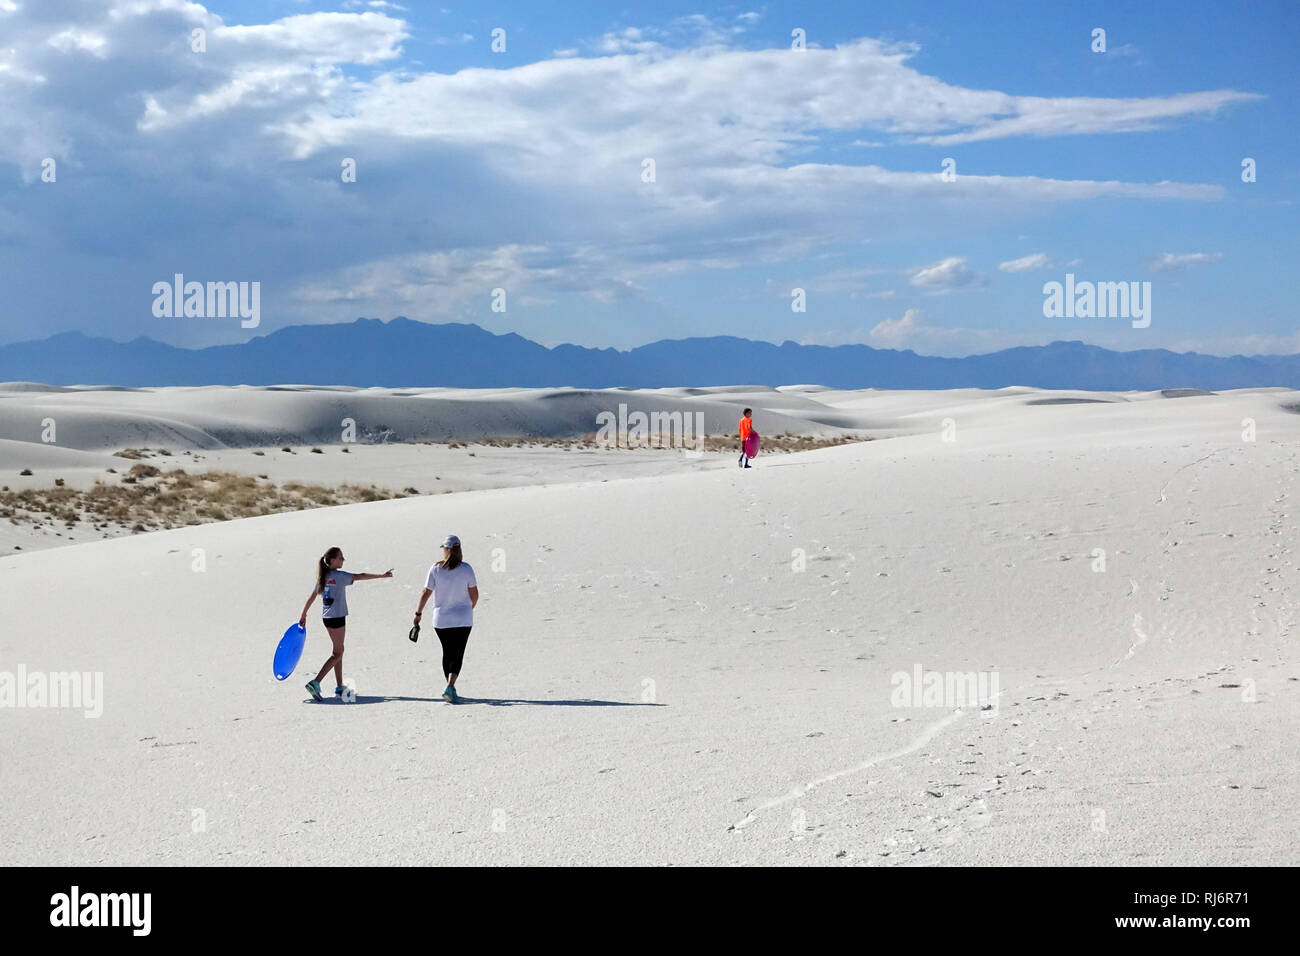 Kids look for a place to go sledding on the sand in White Sands, New Mexico. A must stop tourist attraction and National Monument. Stock Photo